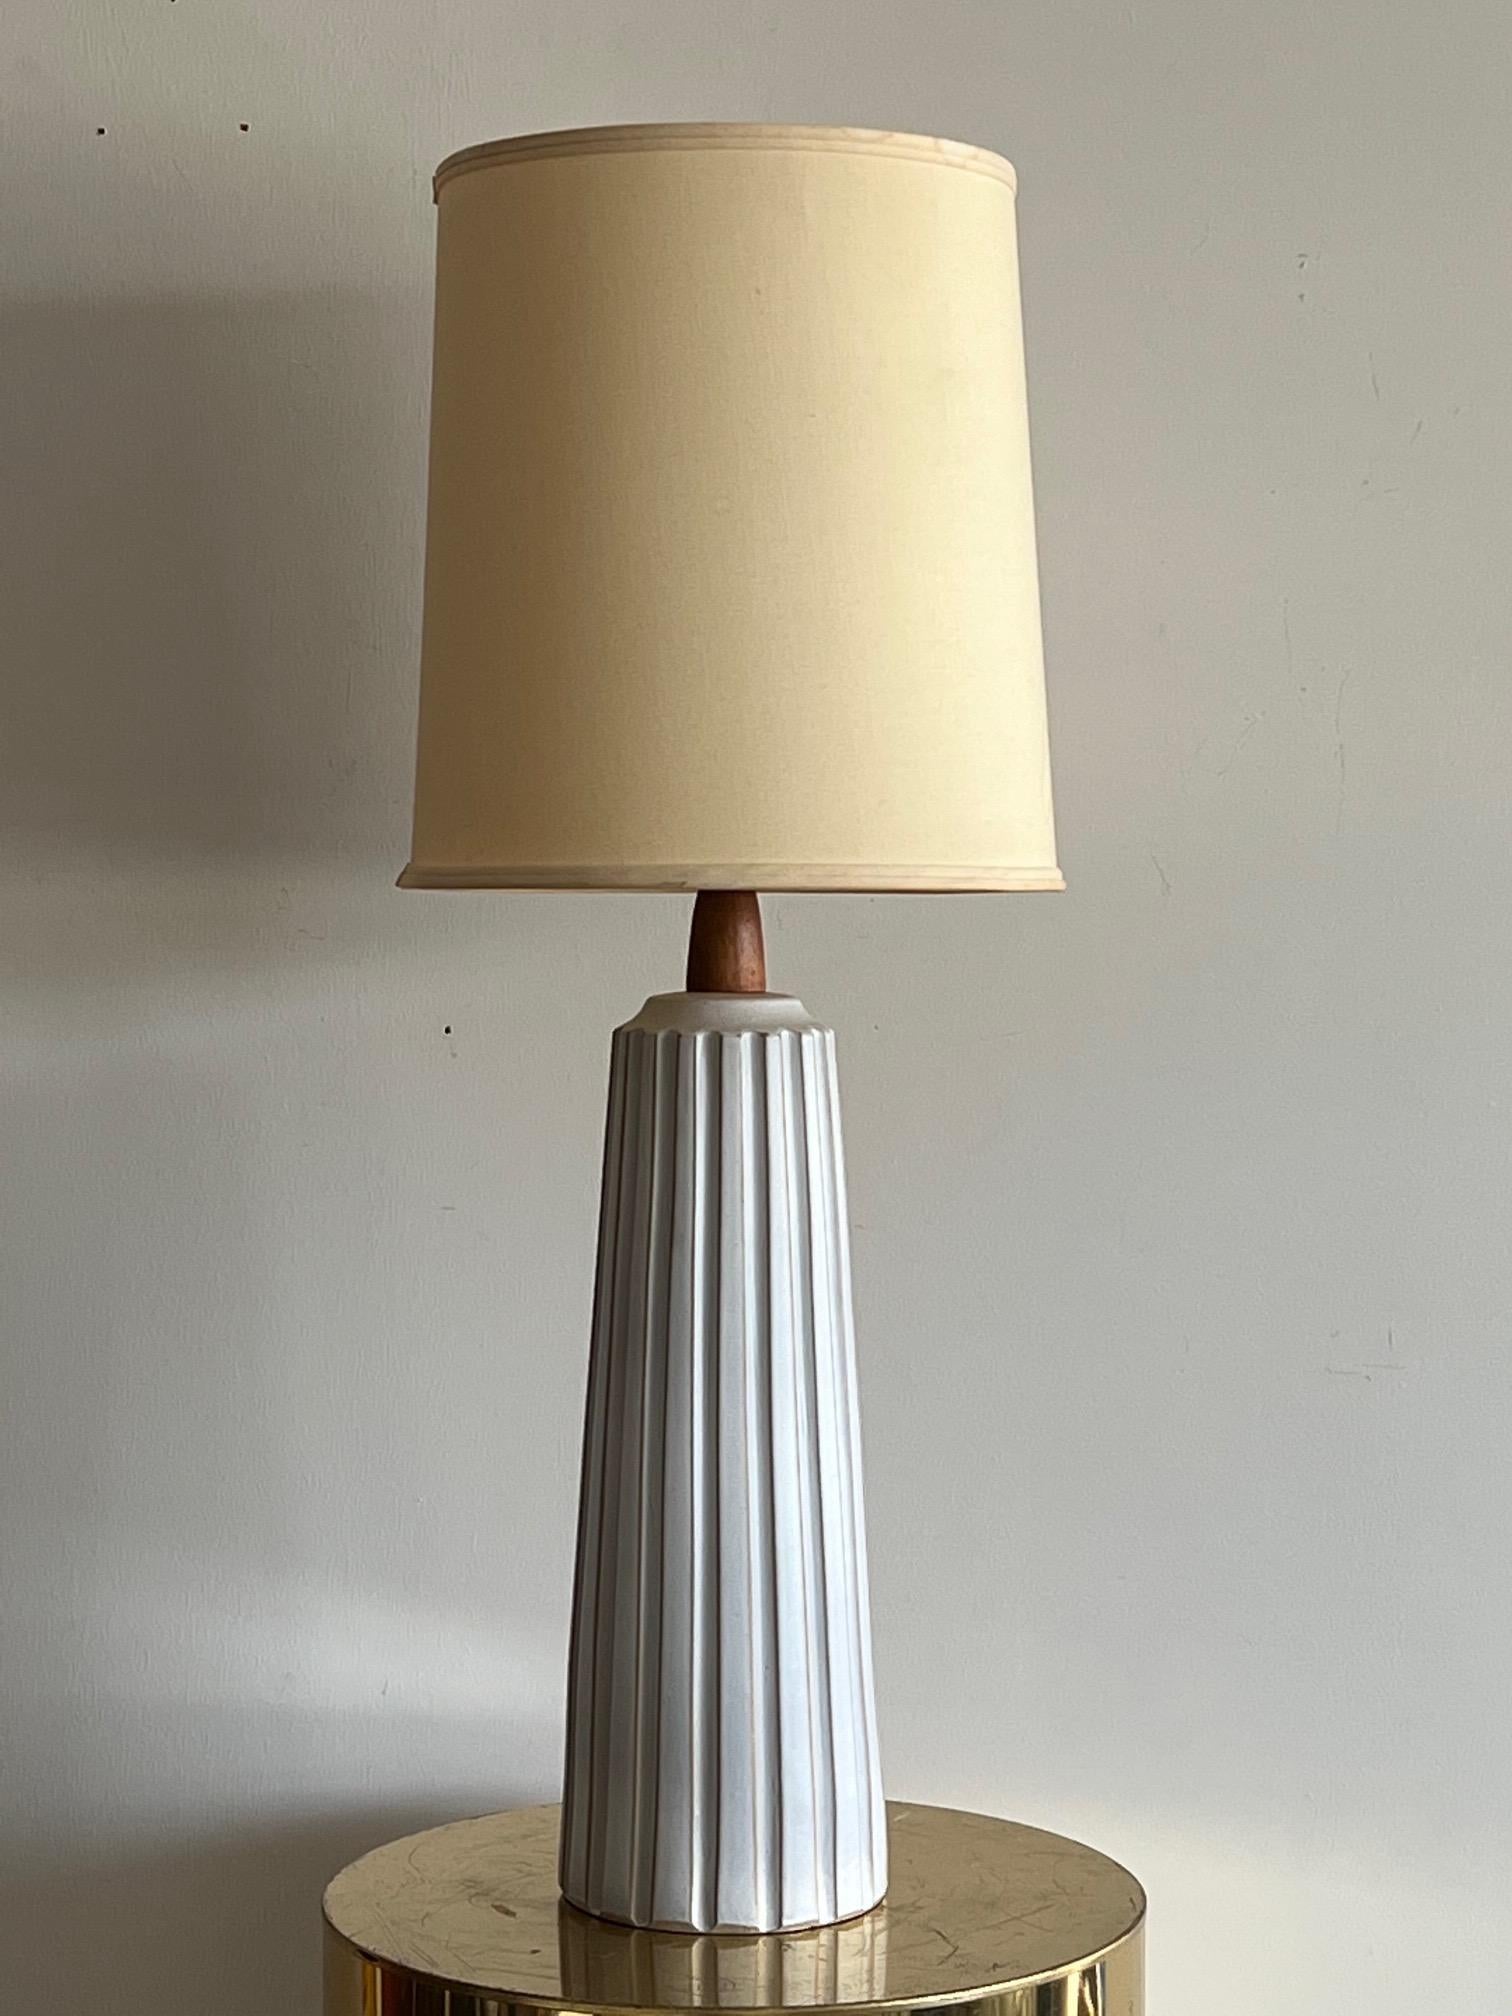 Unusual lamp by Gordon Martz for Marshall Studios, ca' 1960's. Total height with shade 38